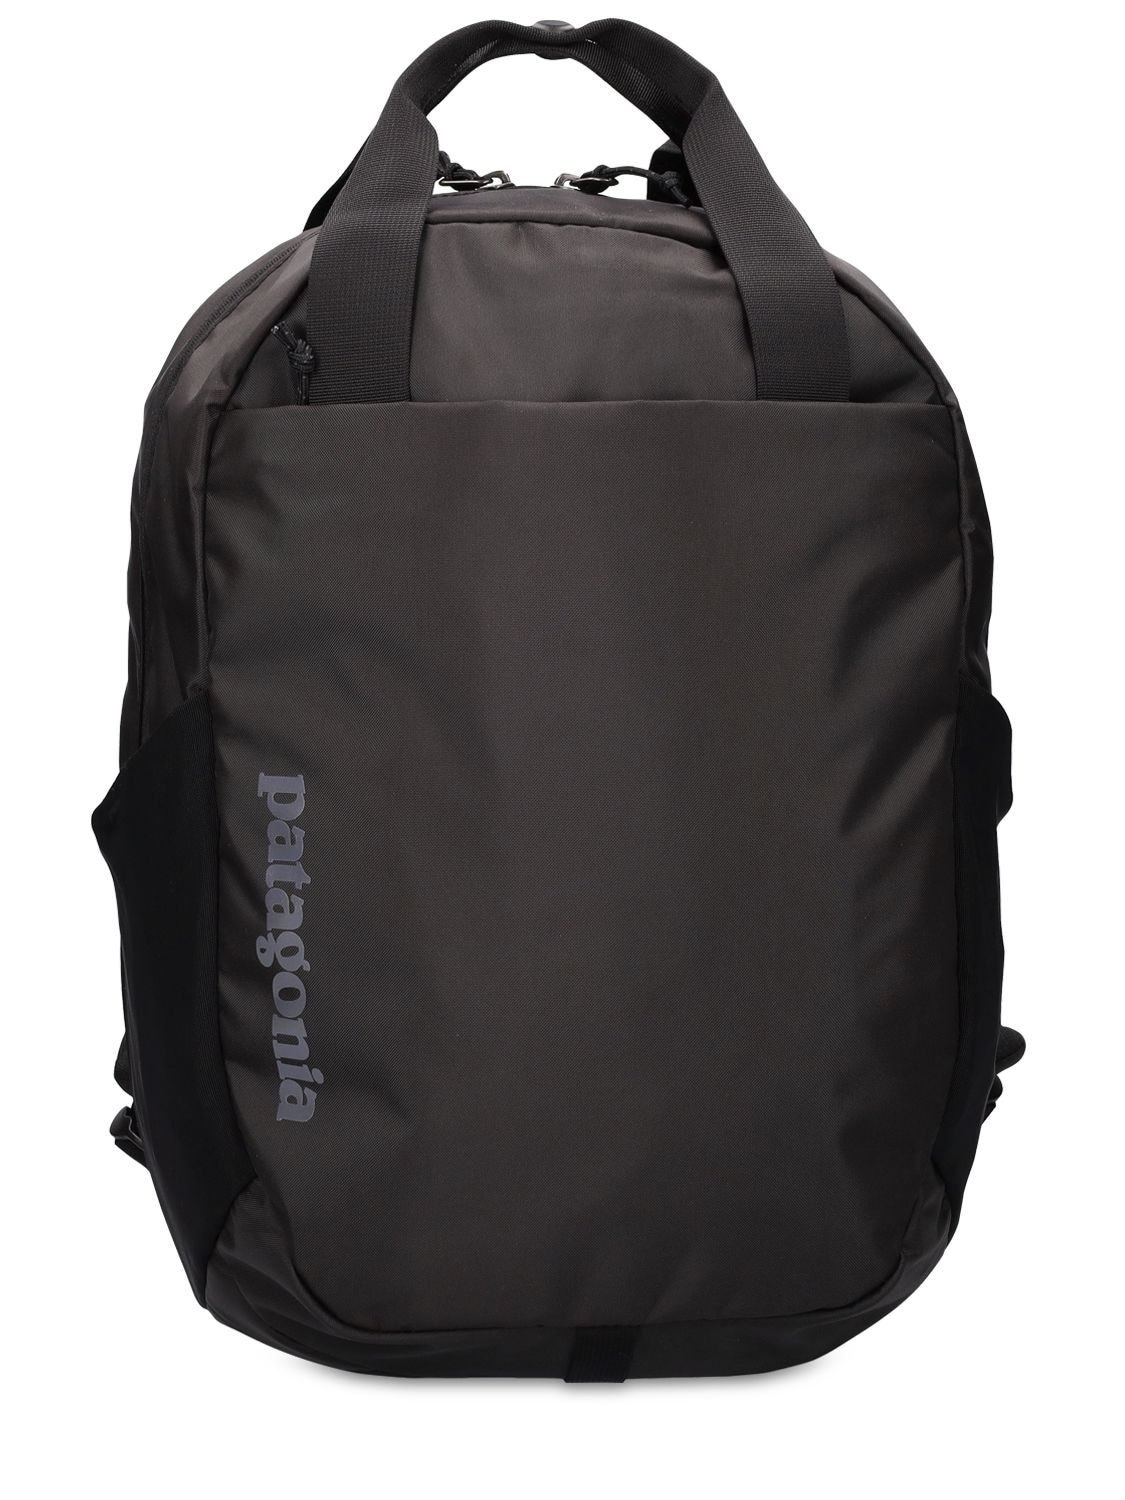 20l Atom Recycled Tech Backpack